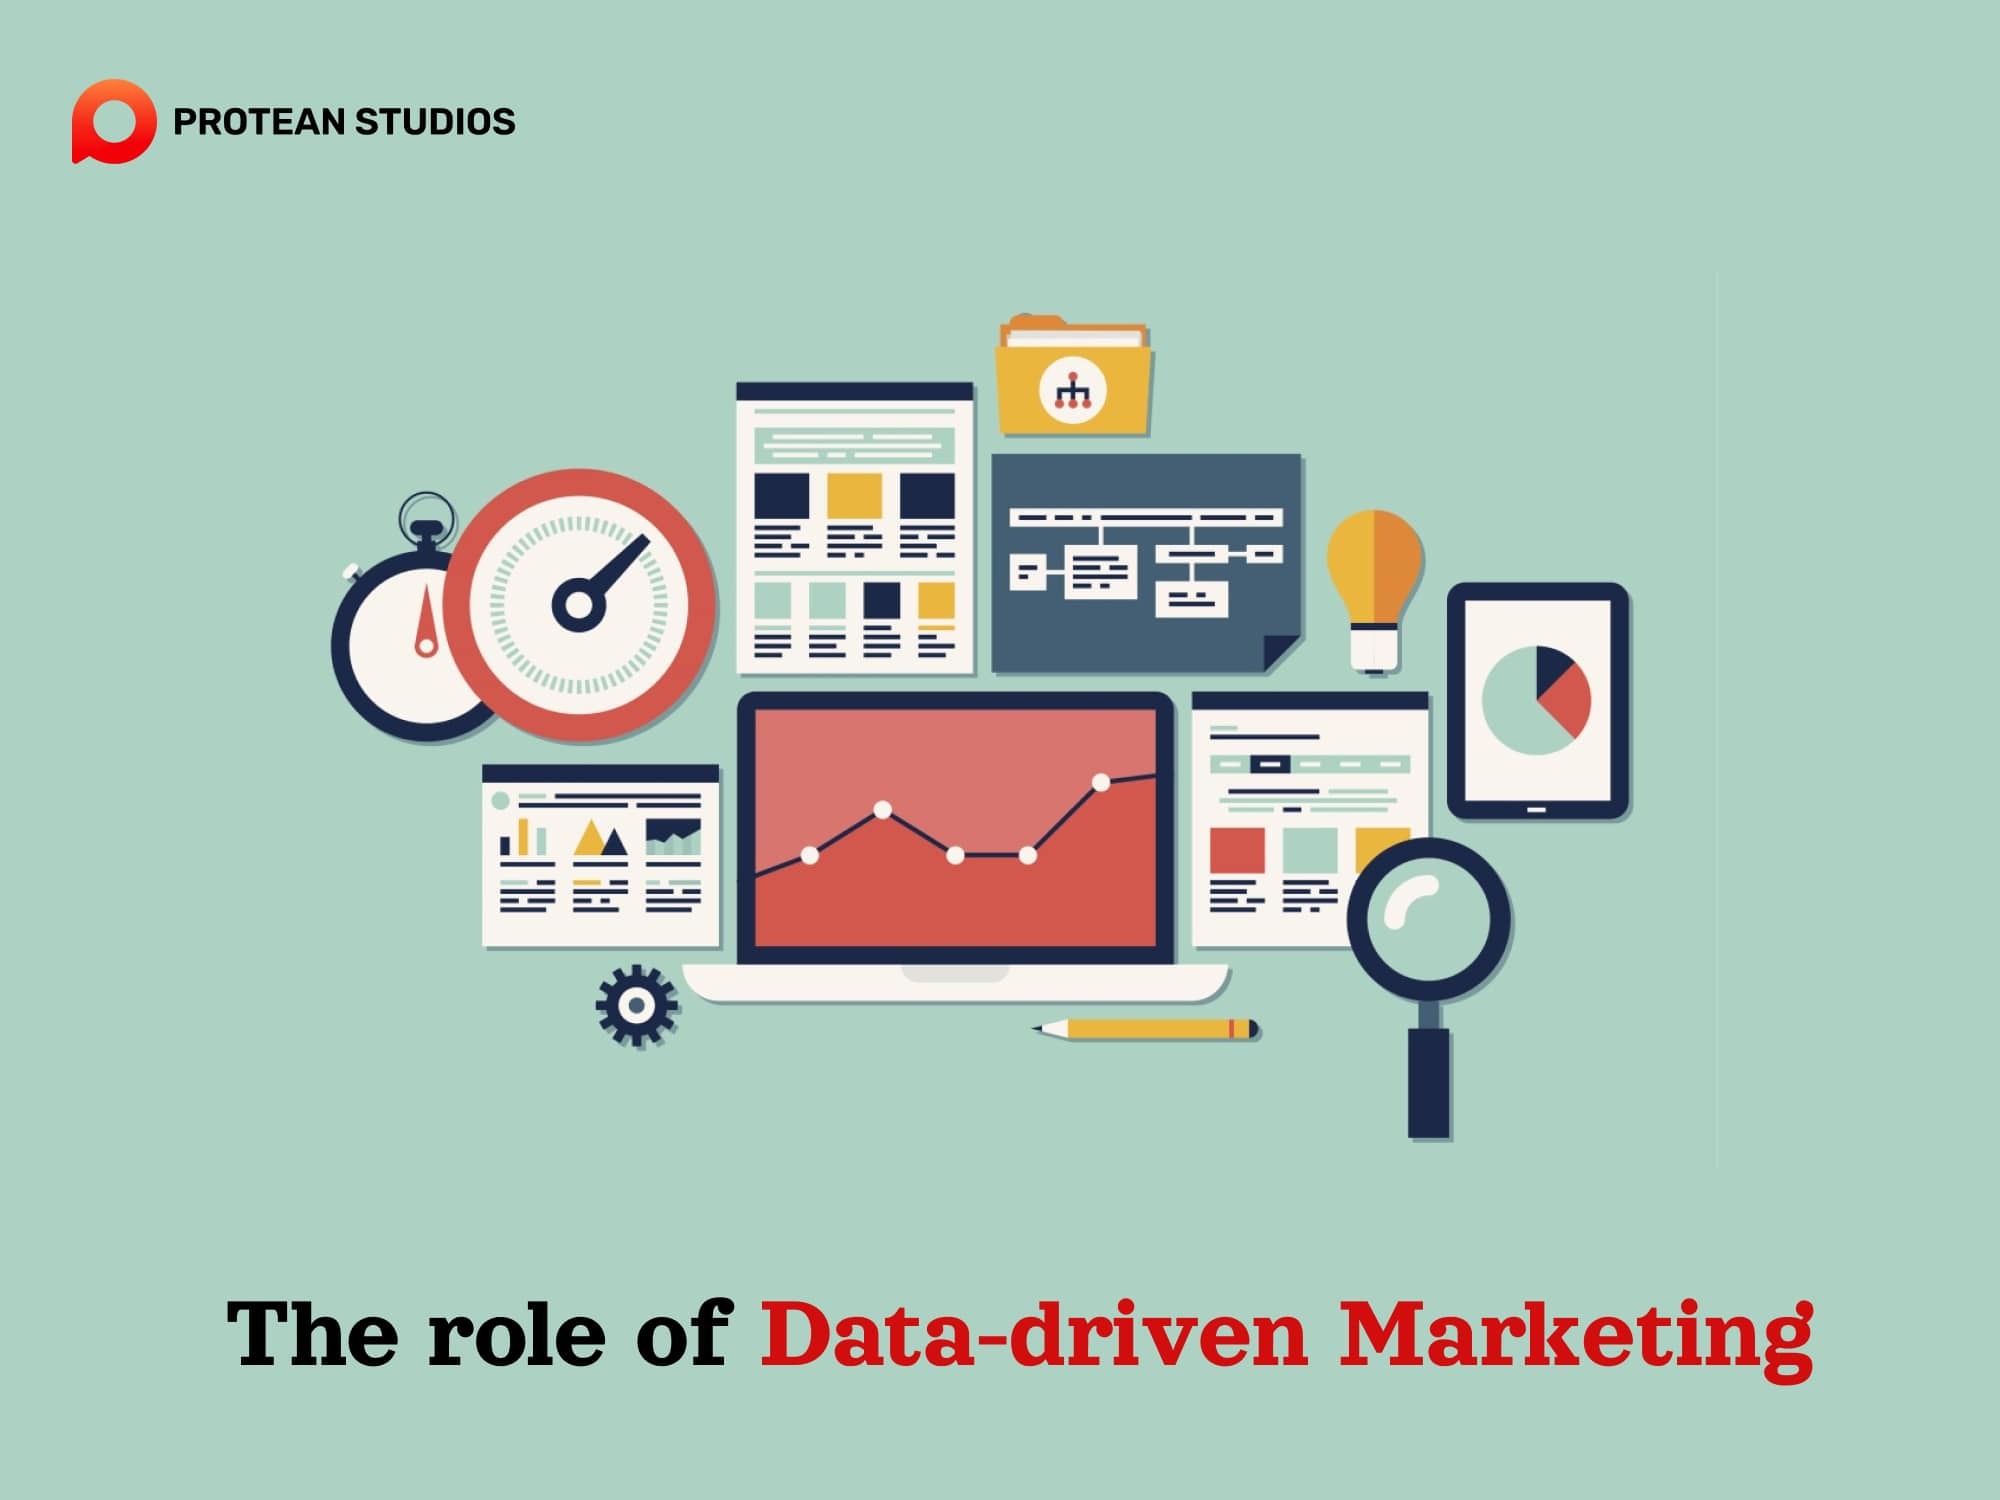 The importance of using data-driven marketing